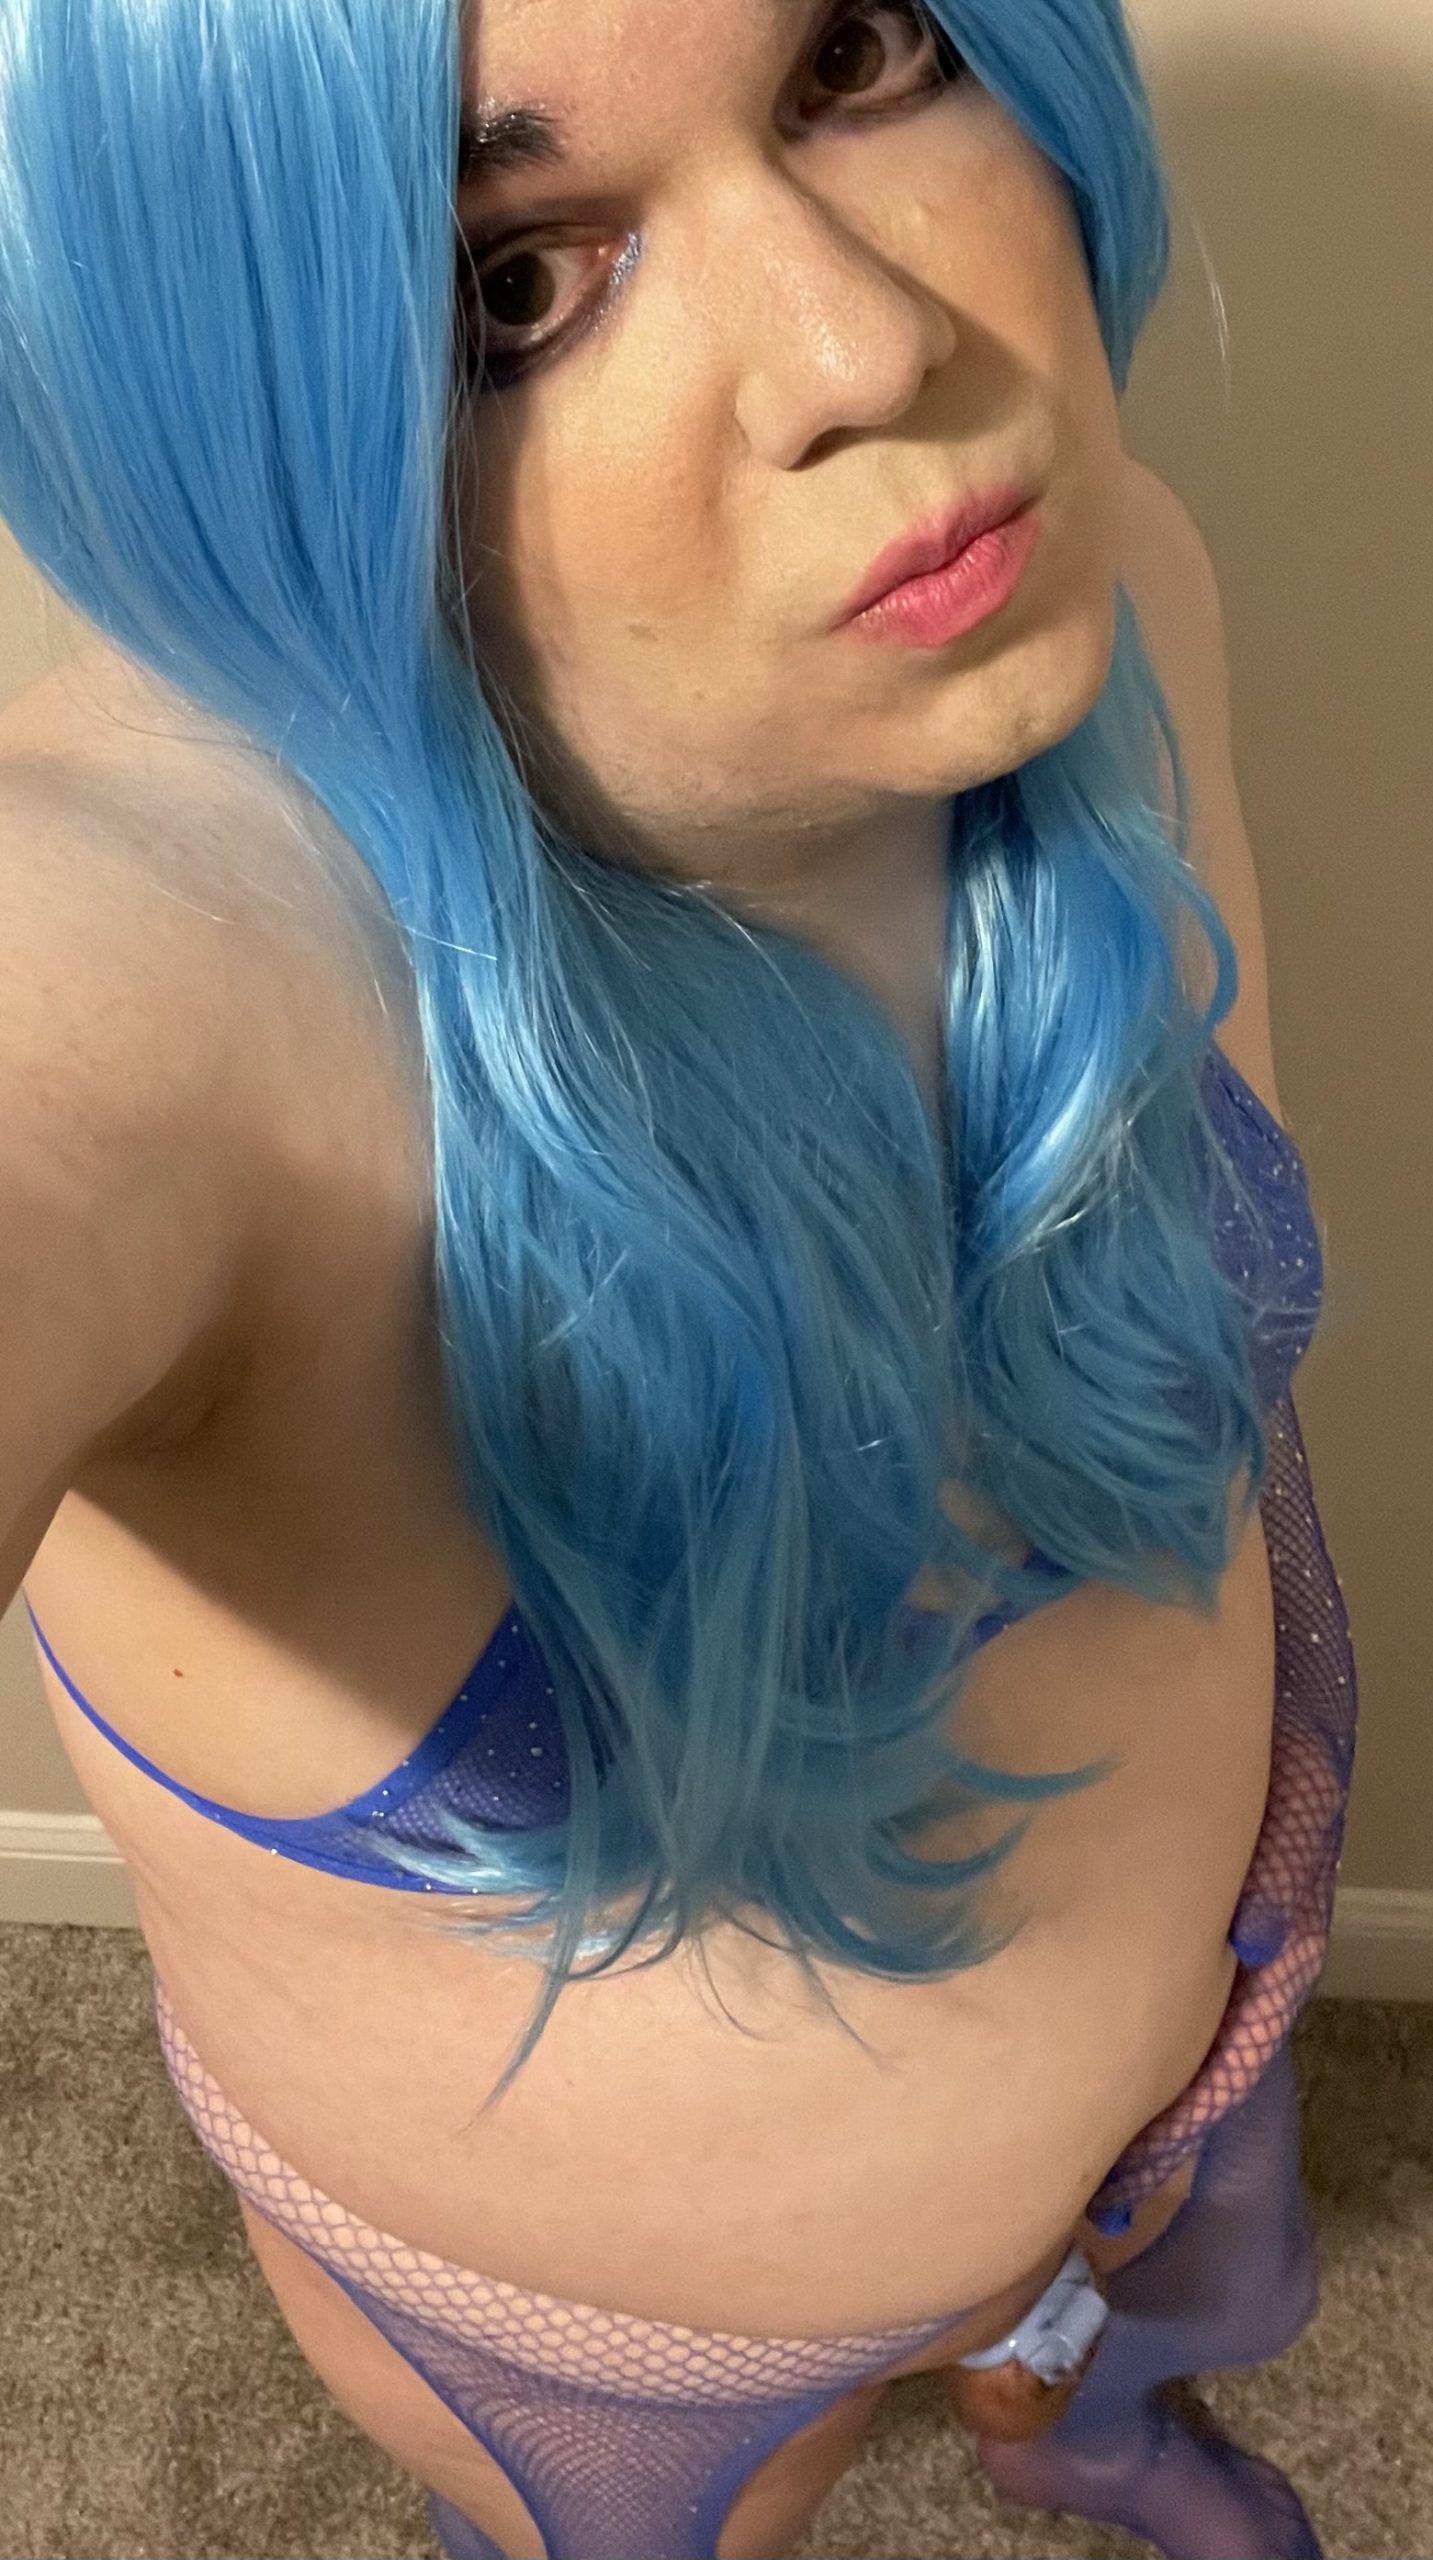 Exposure compilation of Sissy Donna the Icy Sl*t